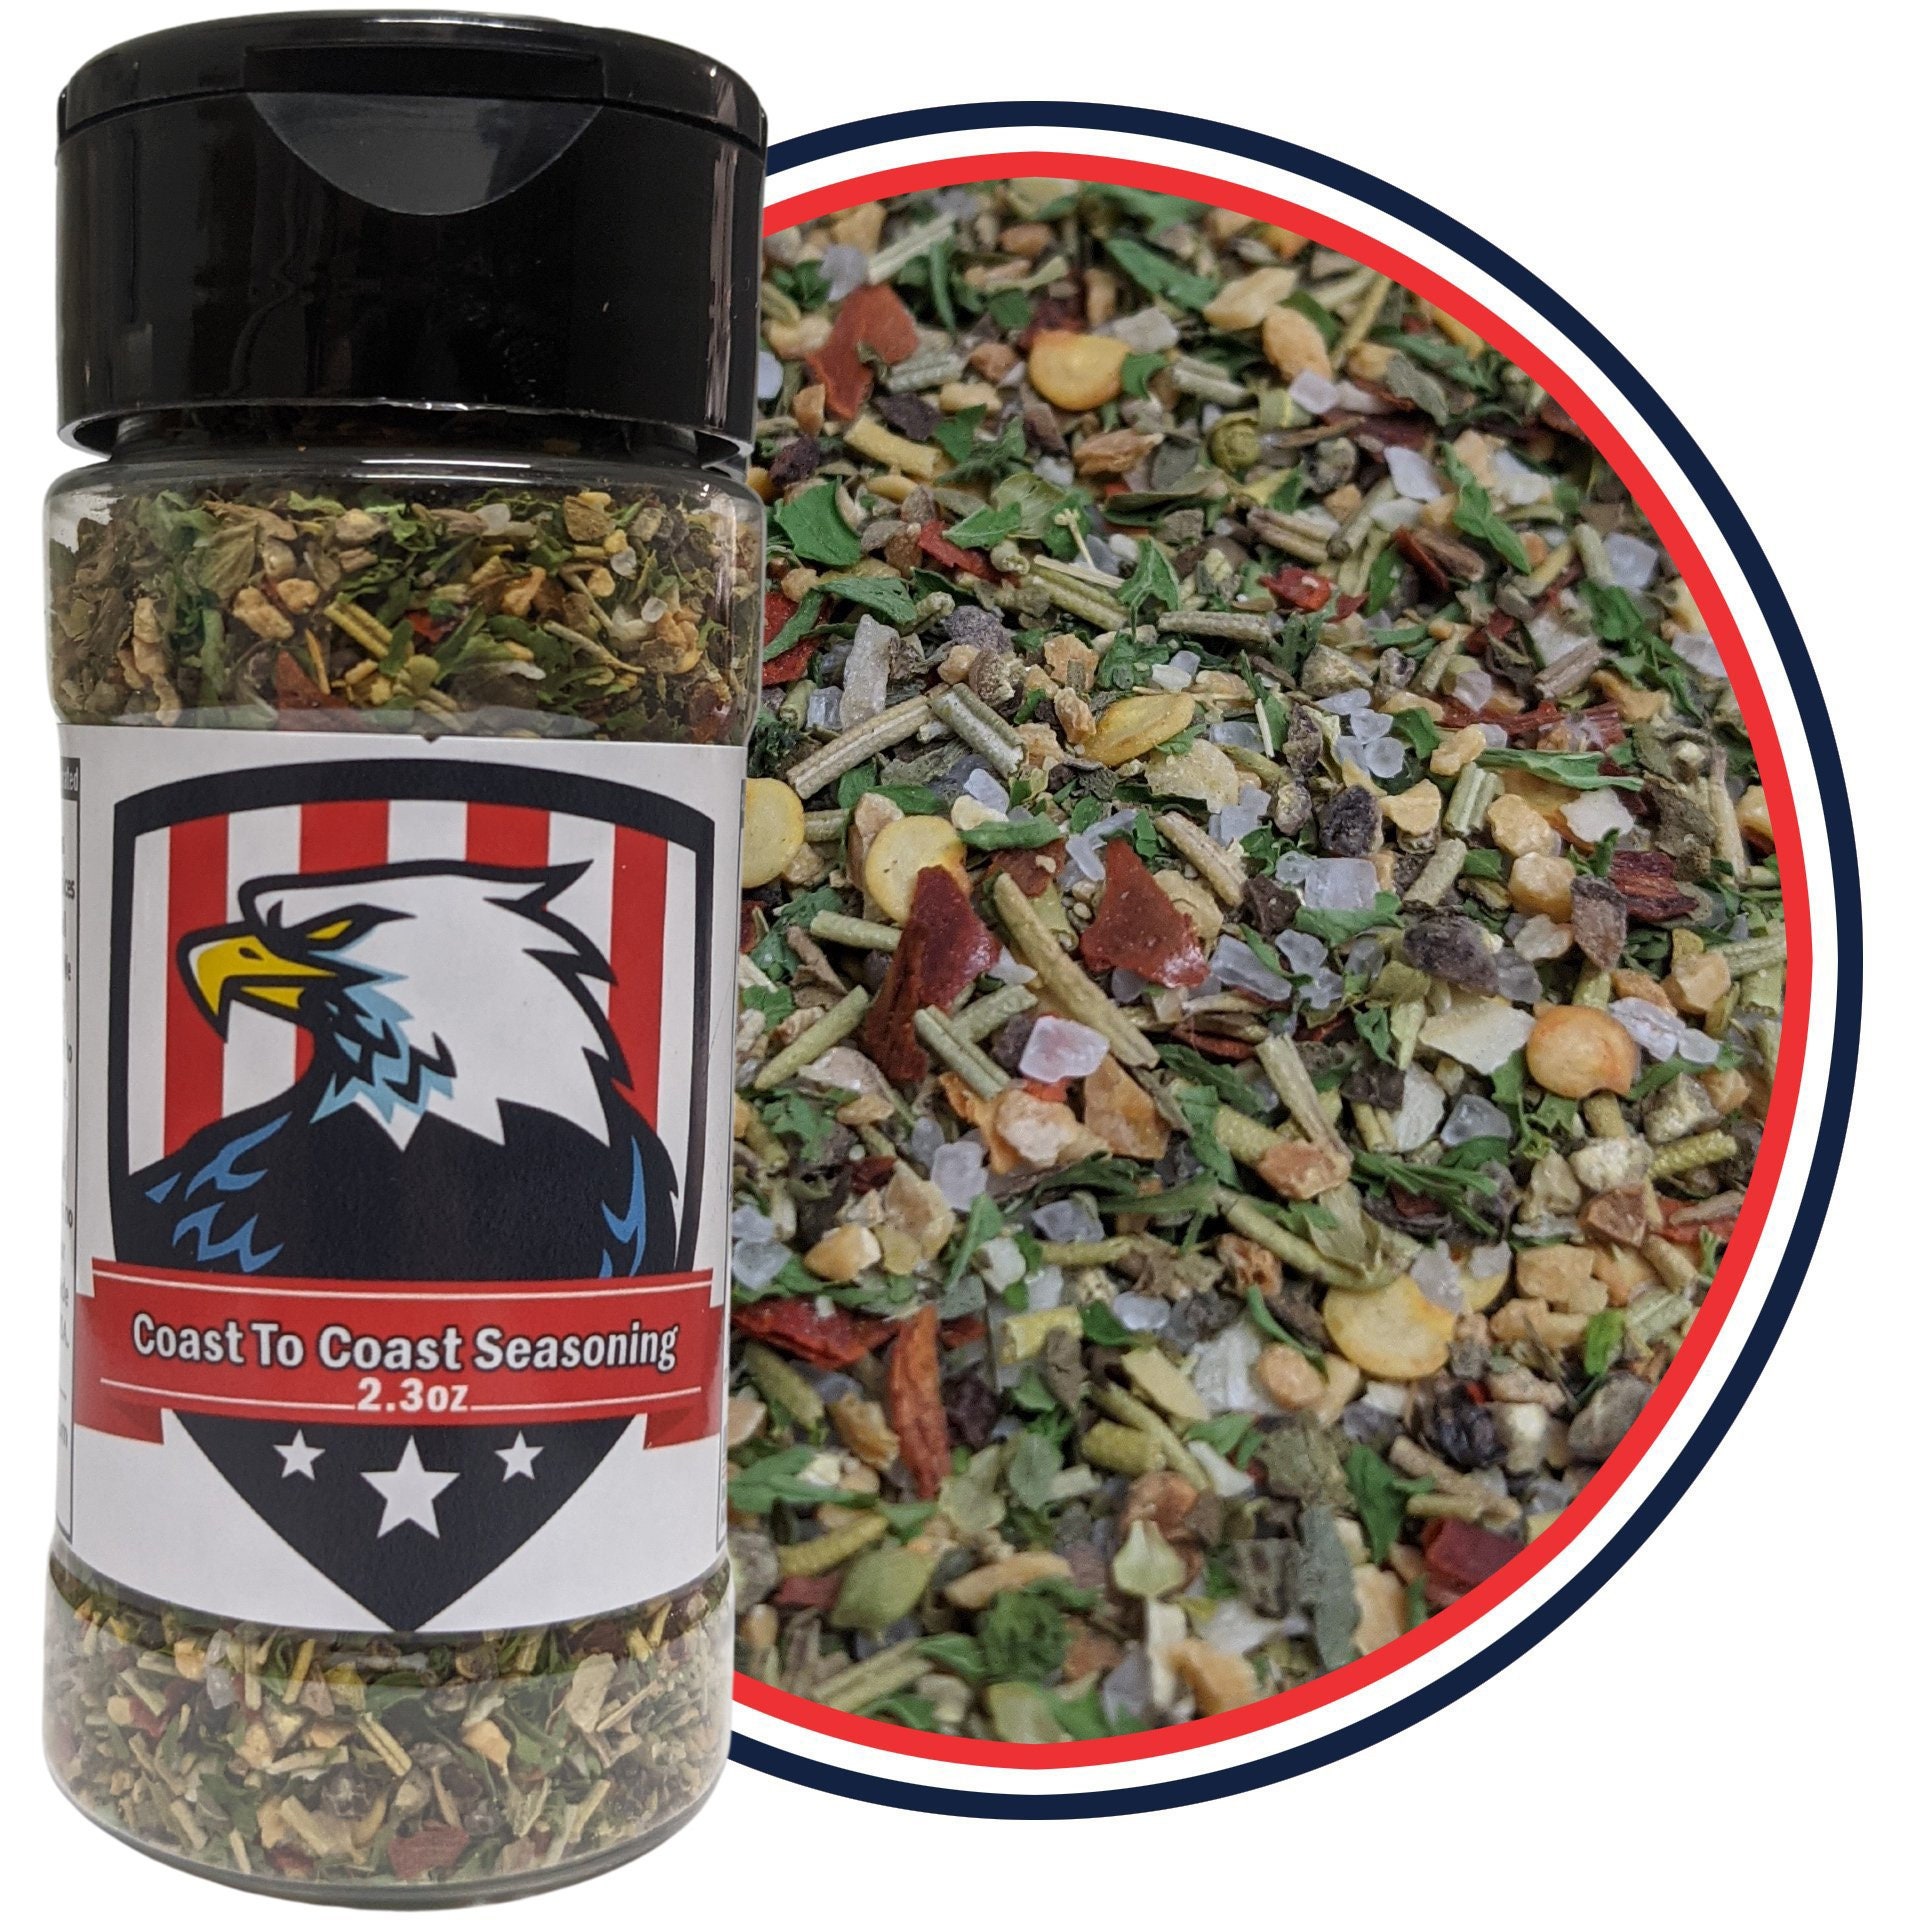 Feisty Spices Gourmet Chitterlings Seasoning, Zero Calories, Low Sodium, 8  Oz, Unique Blend. Seasoning for Chitterlings 